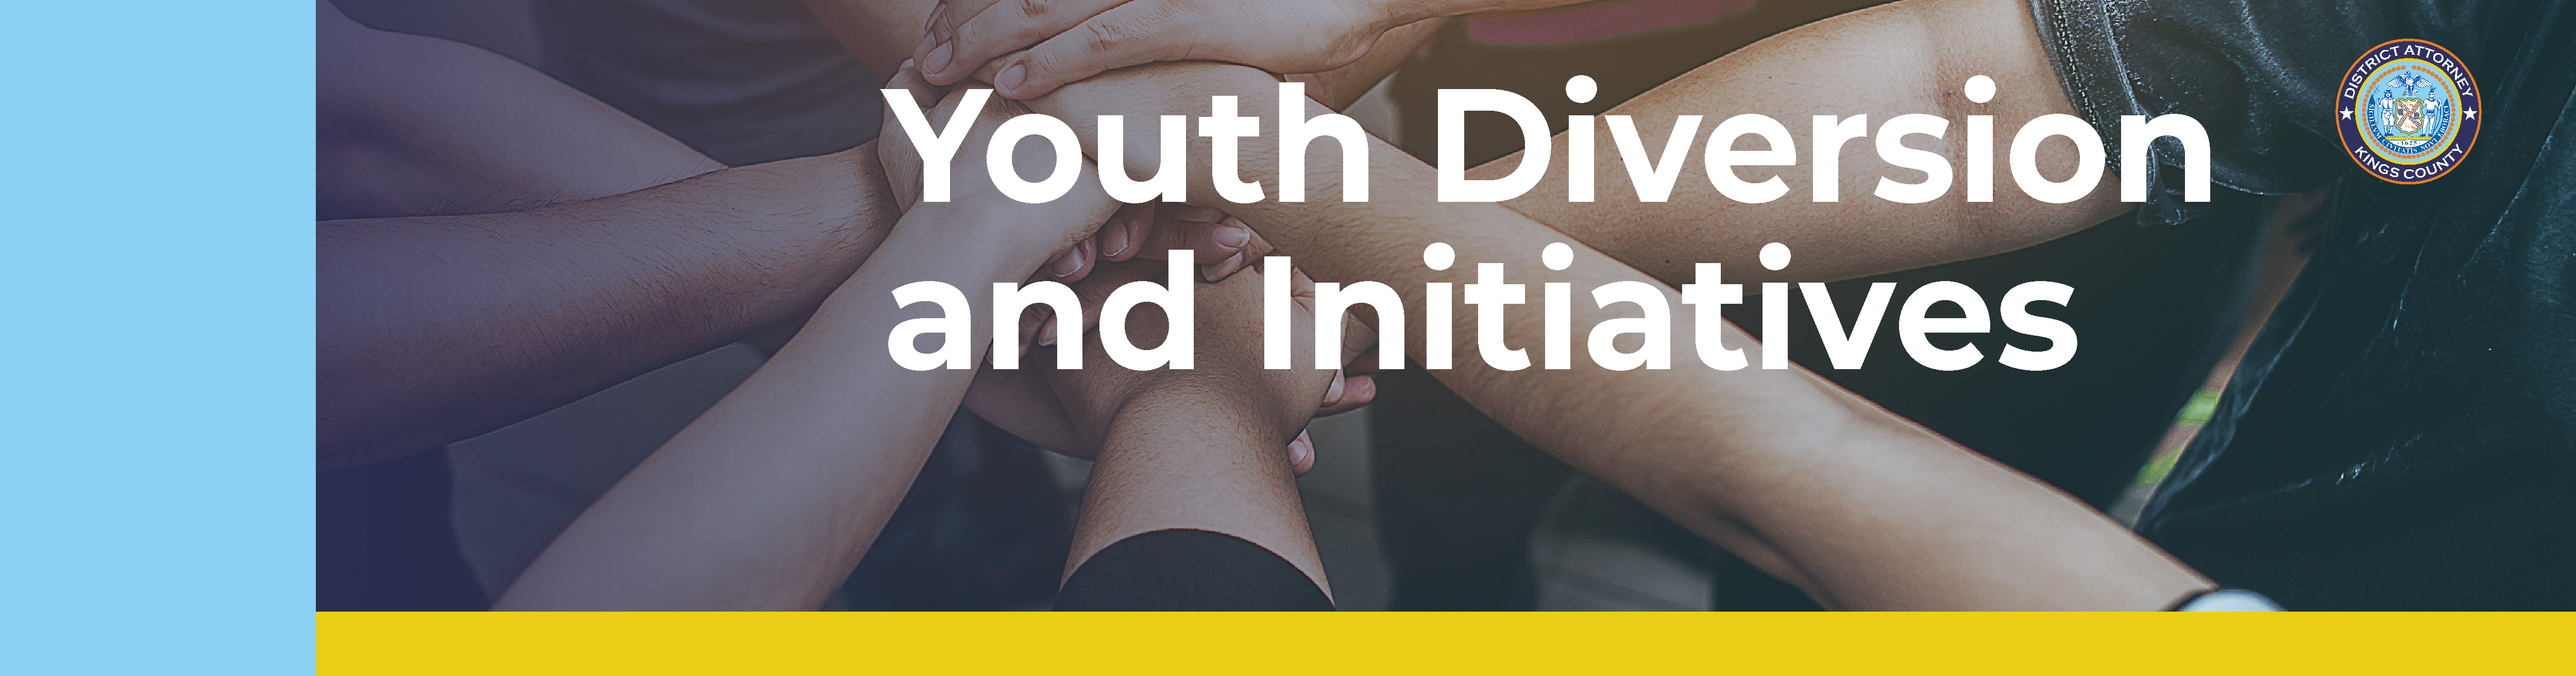 Youth Diversion and Initiatives